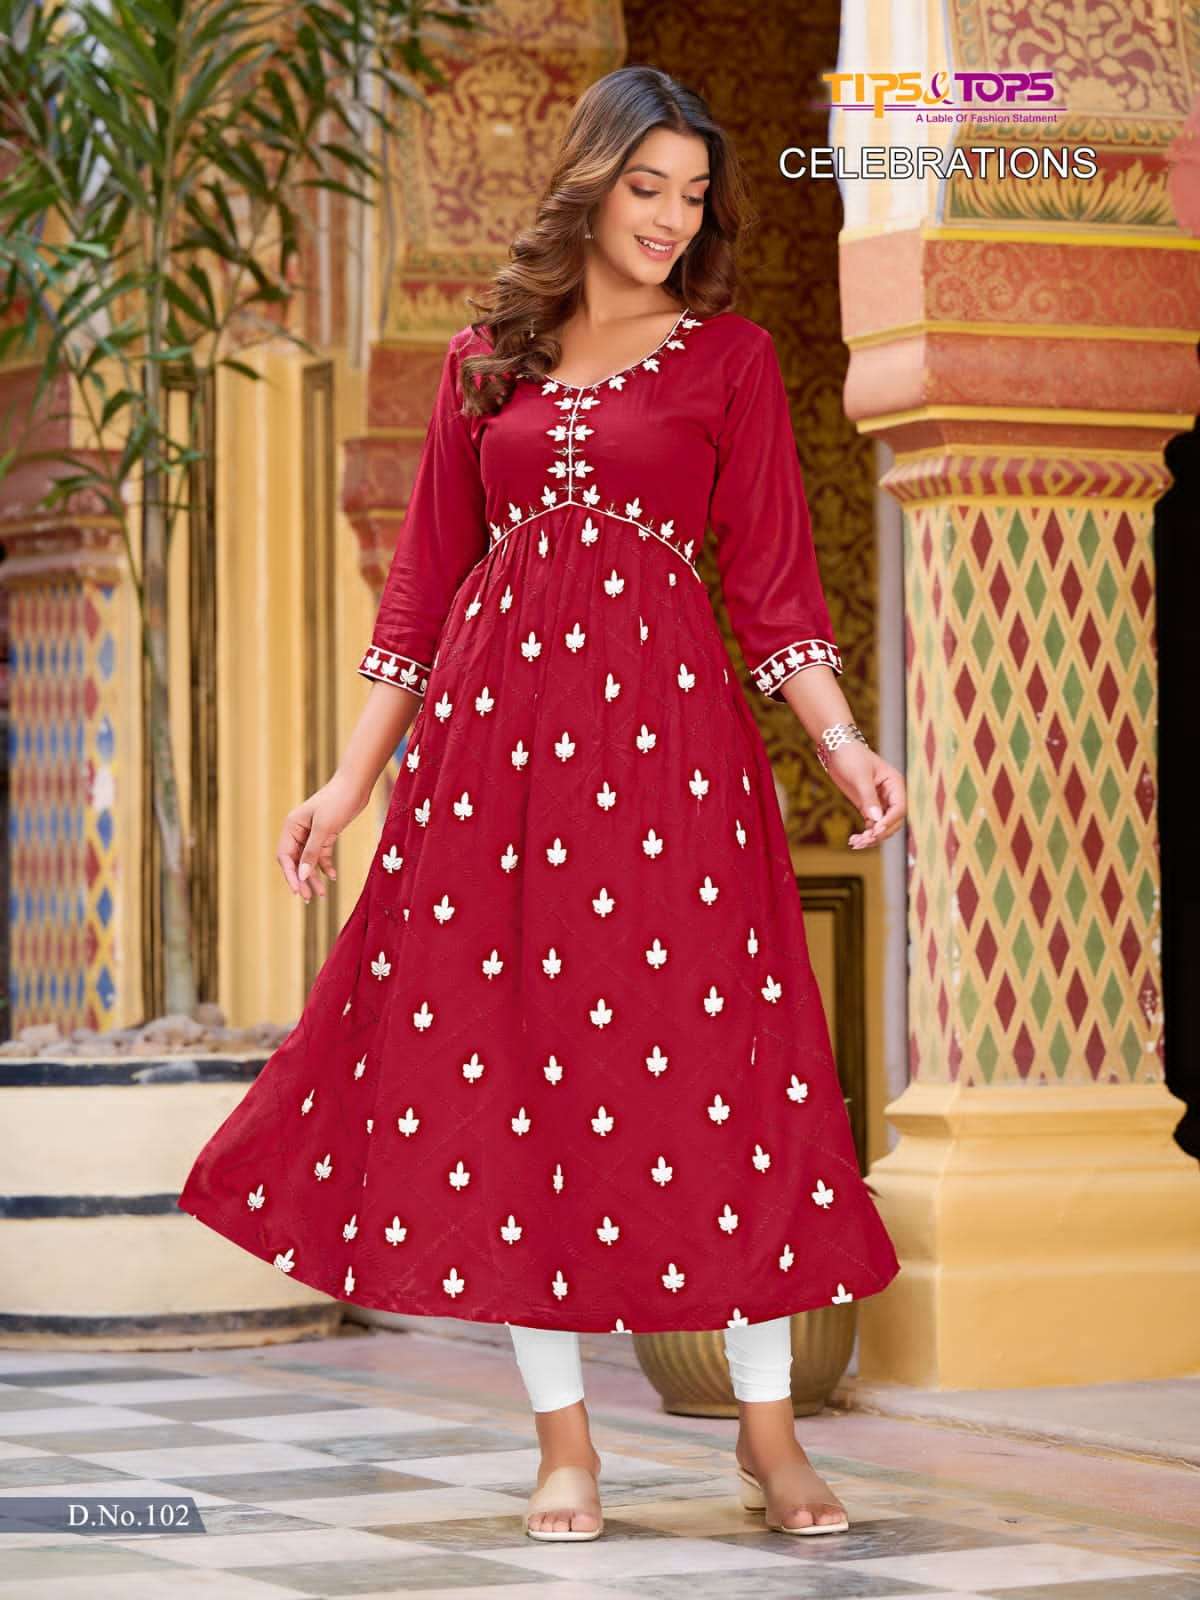 Latest 50 Summer Kurti Designs For Ladies 2023  Tips and Beauty